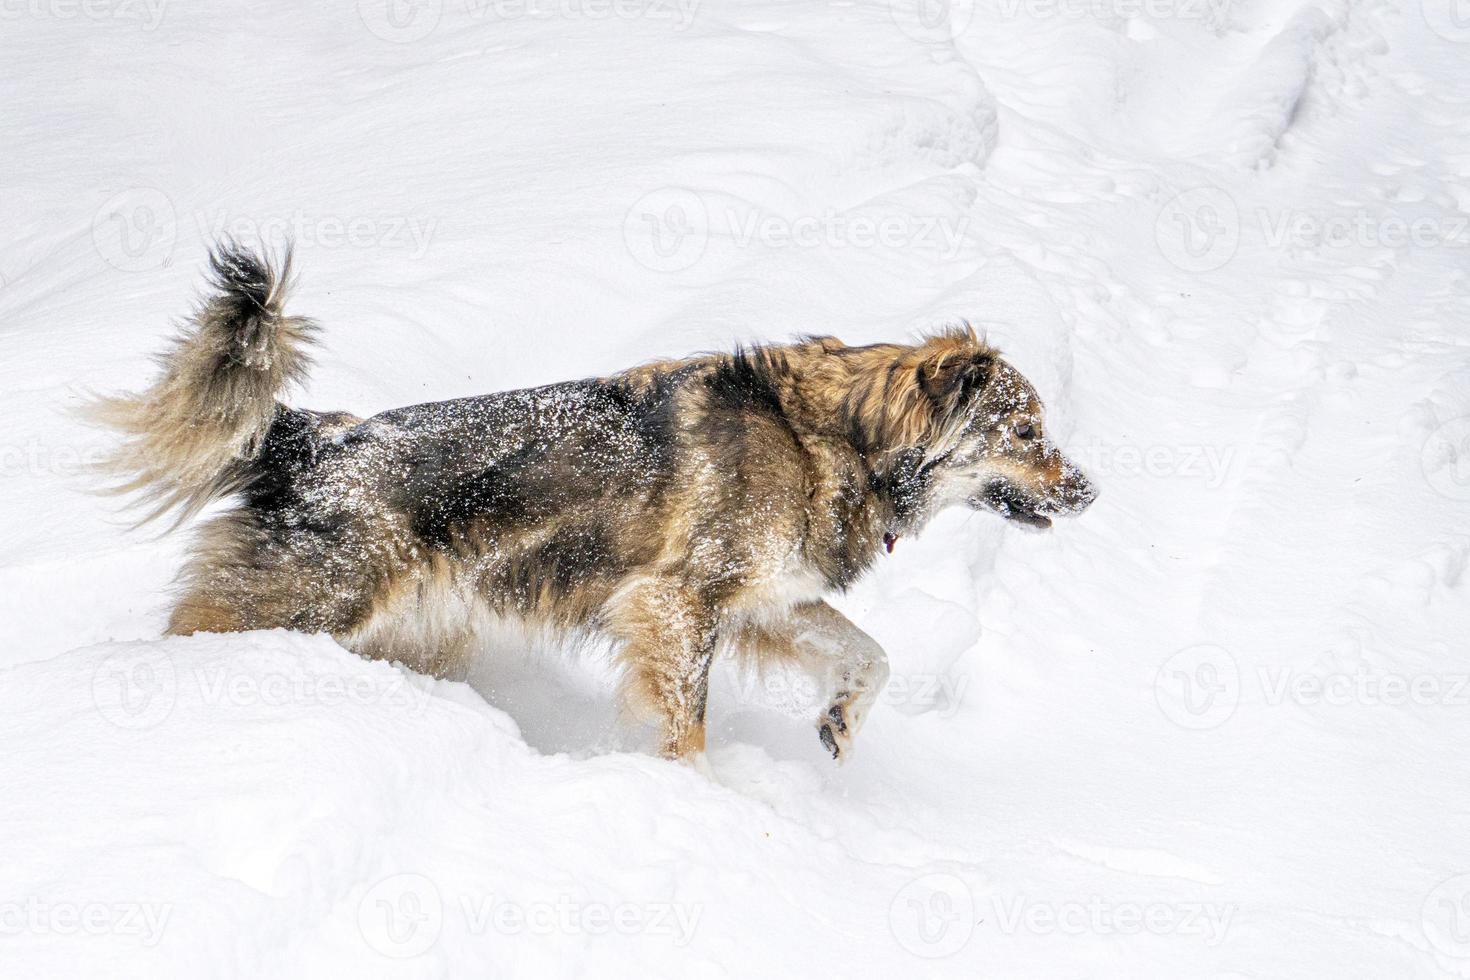 Dog in the snow in winter in dolomites mountains photo